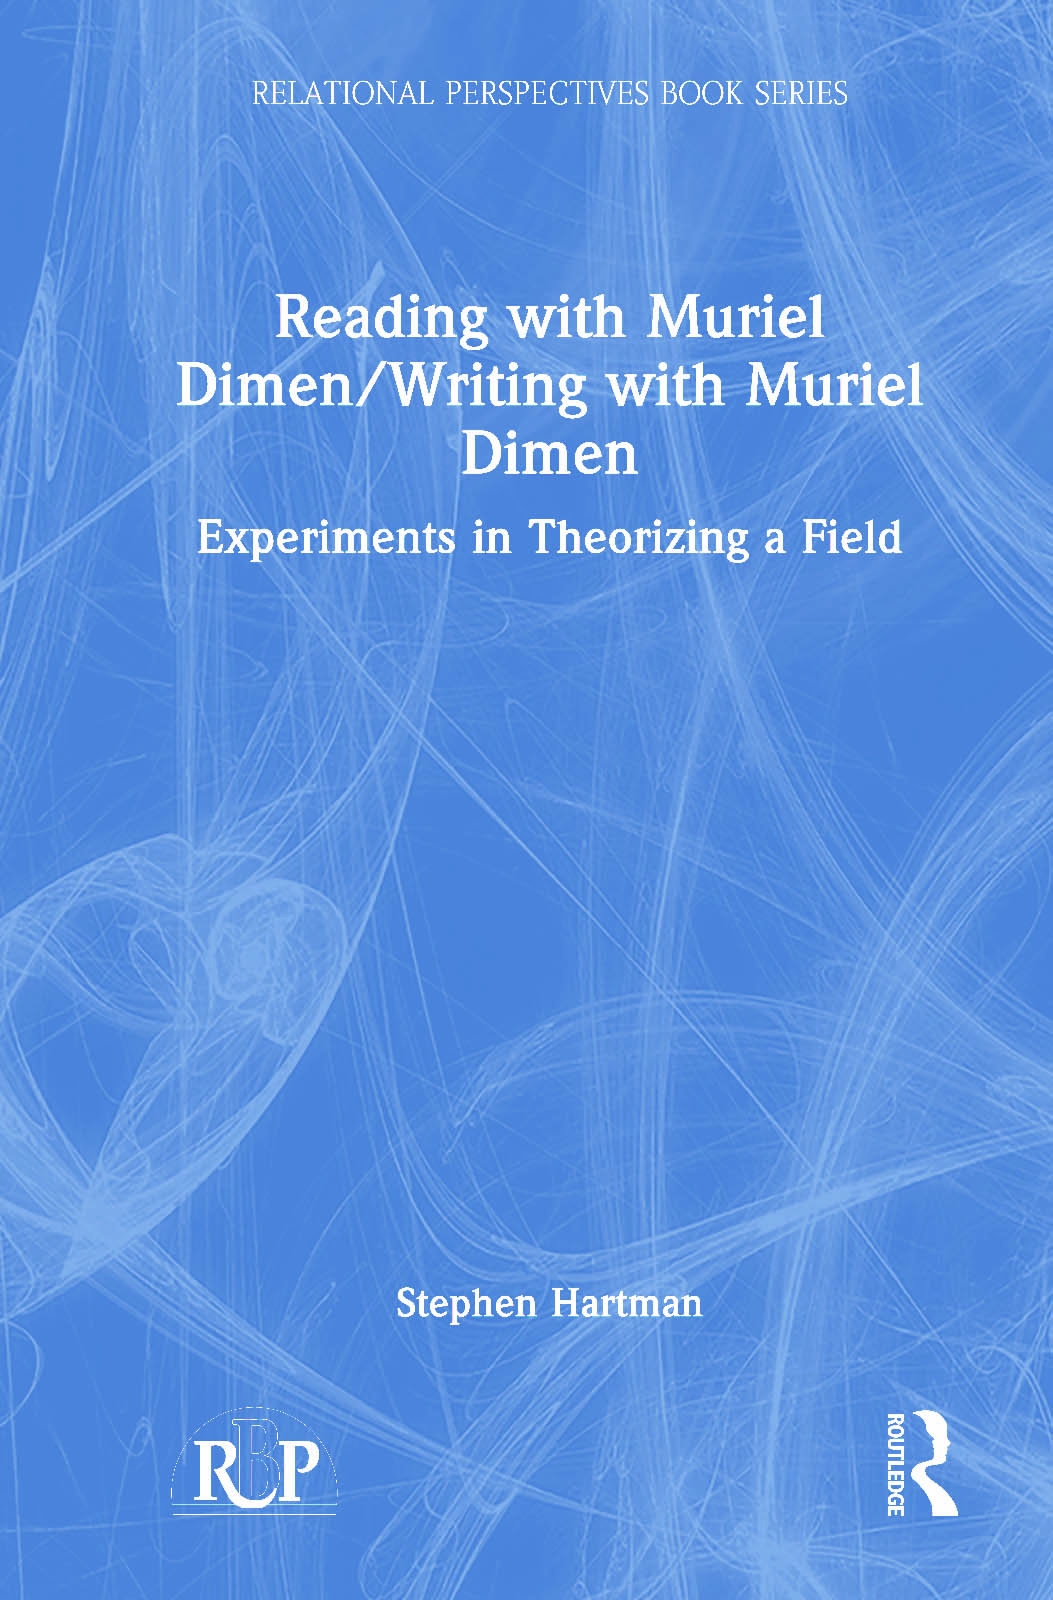 Reading with Muriel Dimen / Writing with Muriel Dimen: Experiments in Theorizing a Field